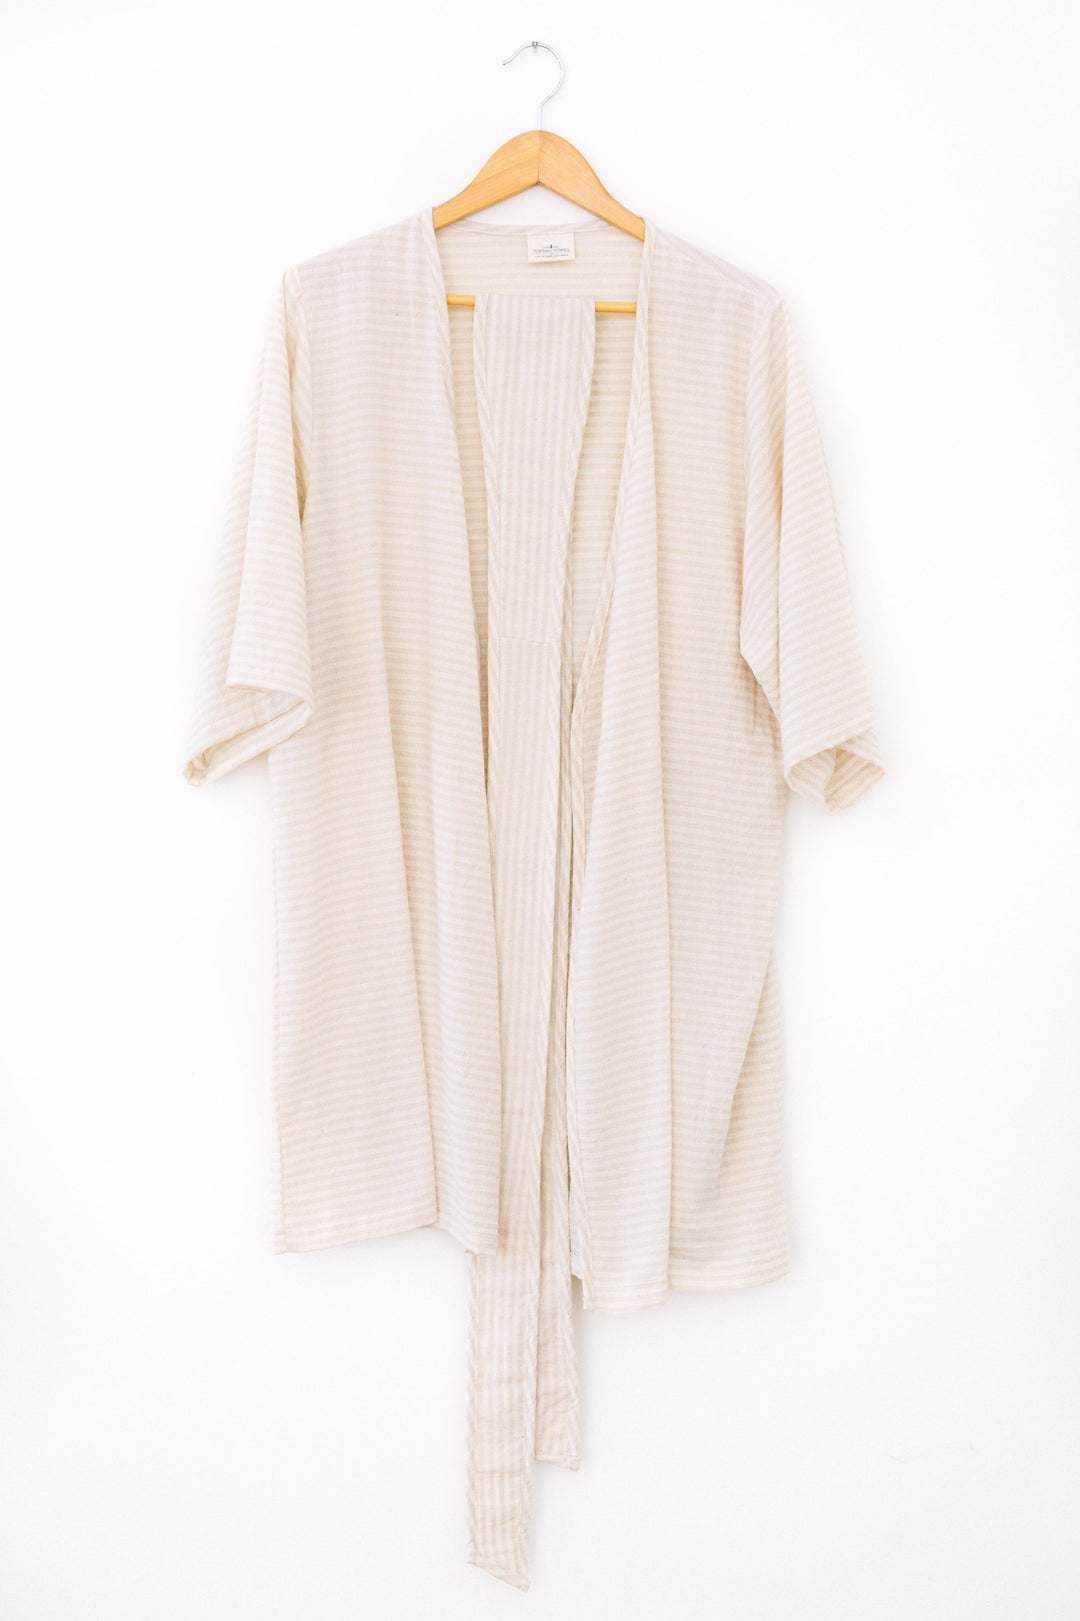 THE FRESH <br> Striped Cover-up